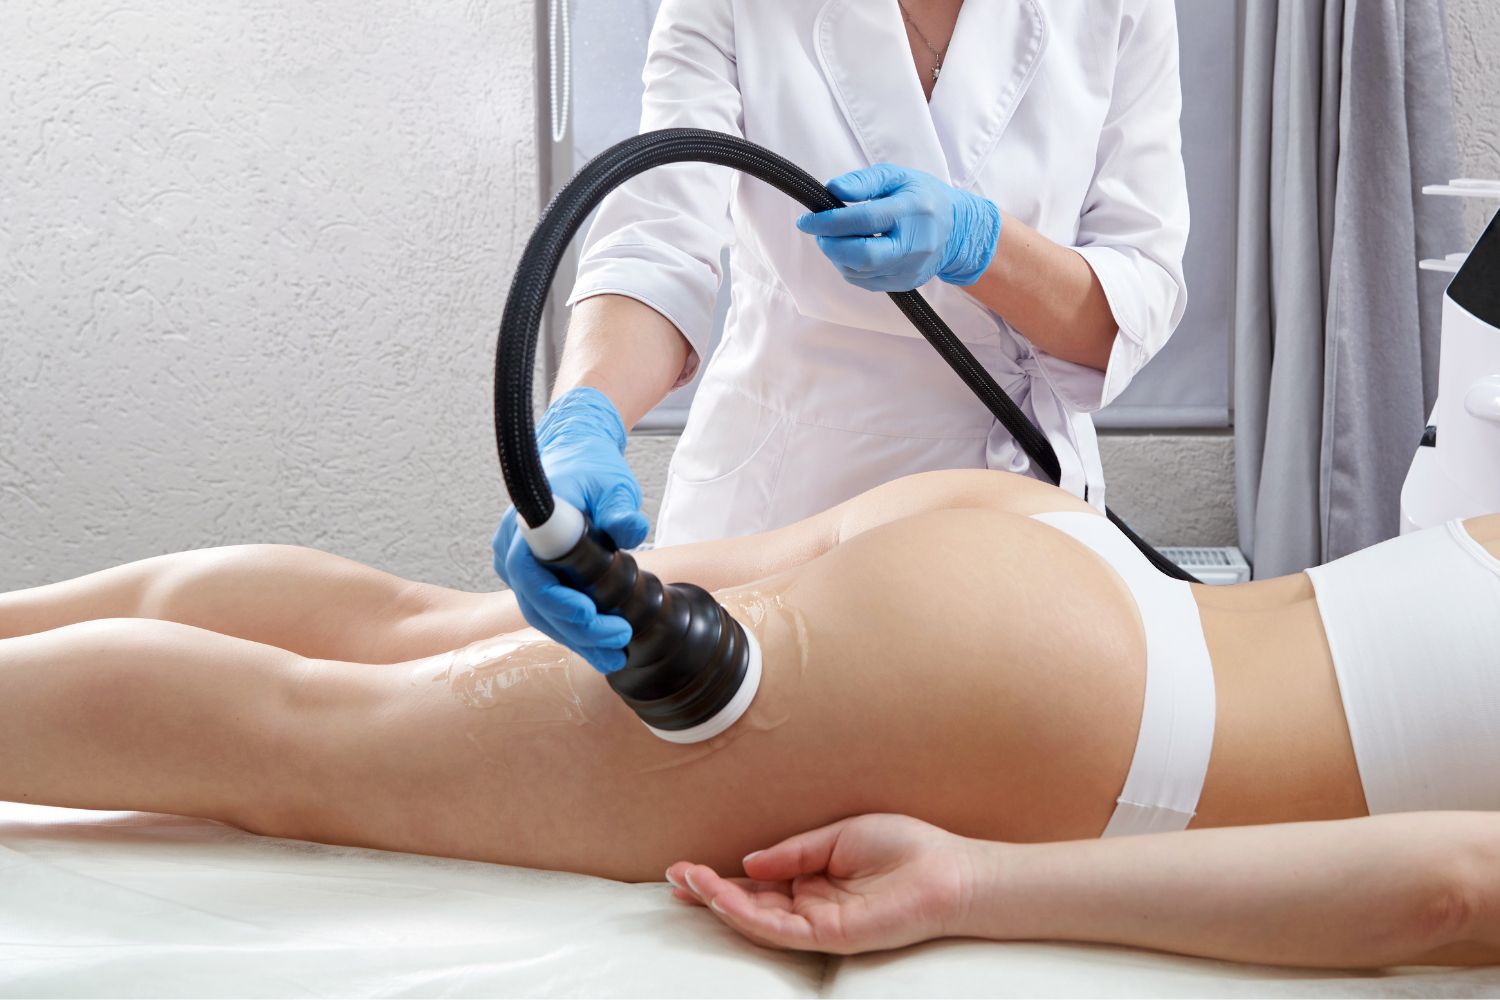 Exion: Innovative Non-Invasive Fat Reduction and Skin Tightening